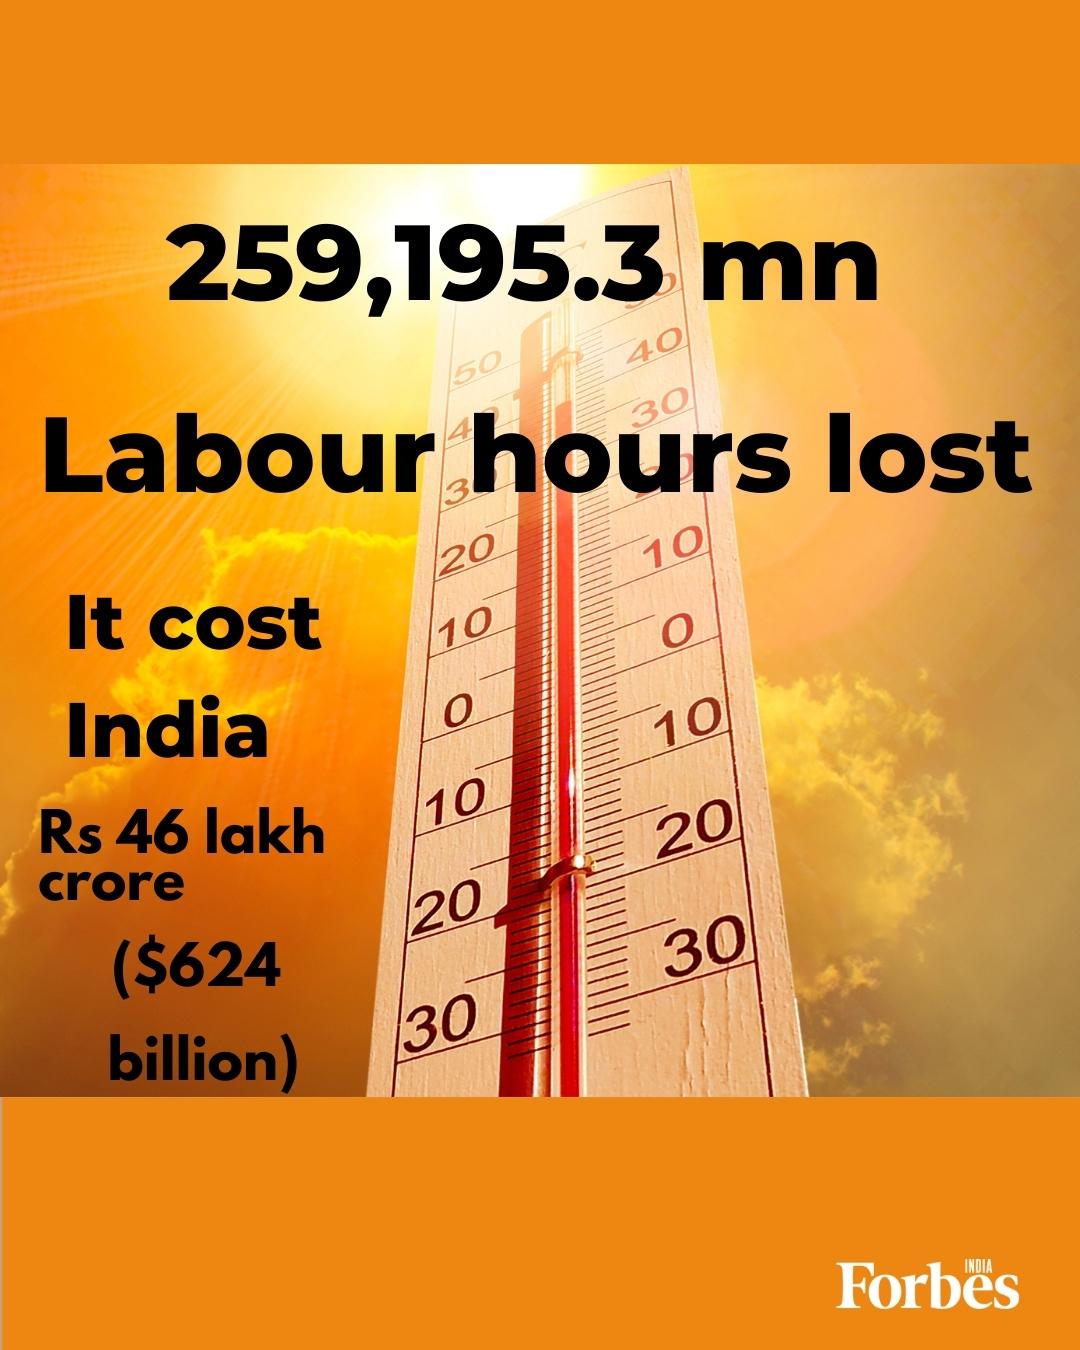 Humid heat cost India 259 billion labour hours from 2001 to 2020